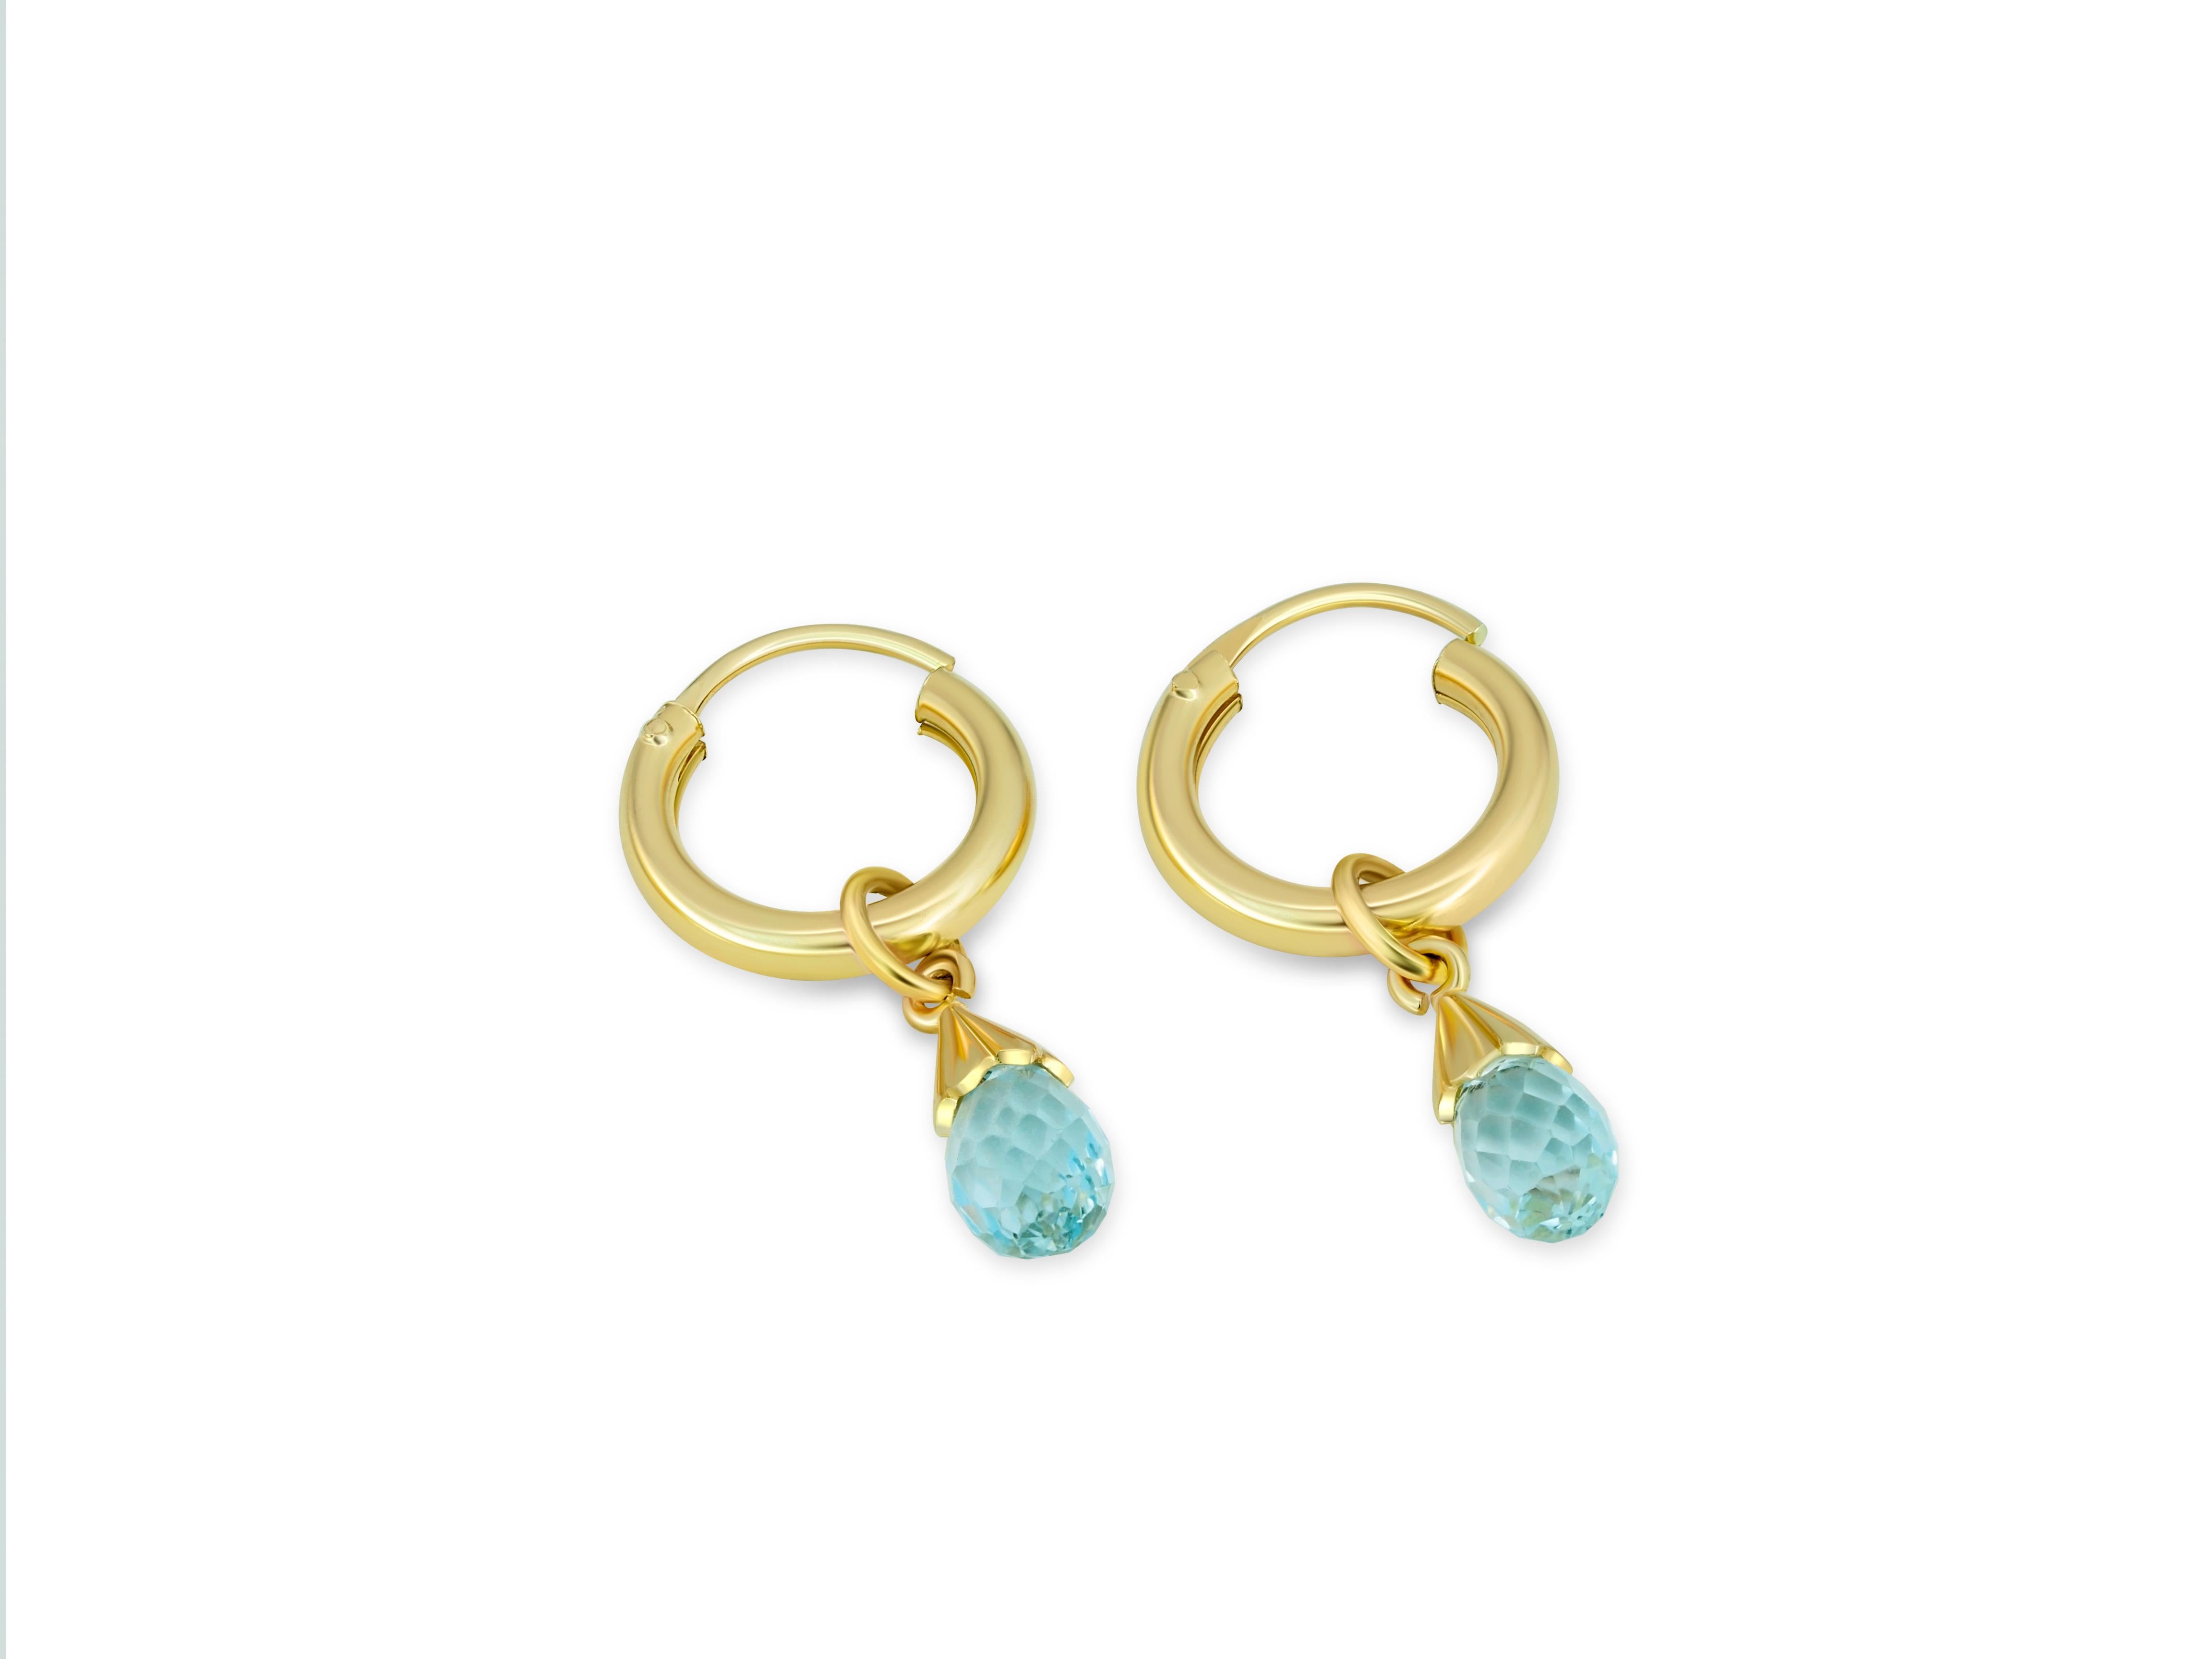 Modern Hoop Earrings and Topazs Briolette Charms in 14k Gold For Sale